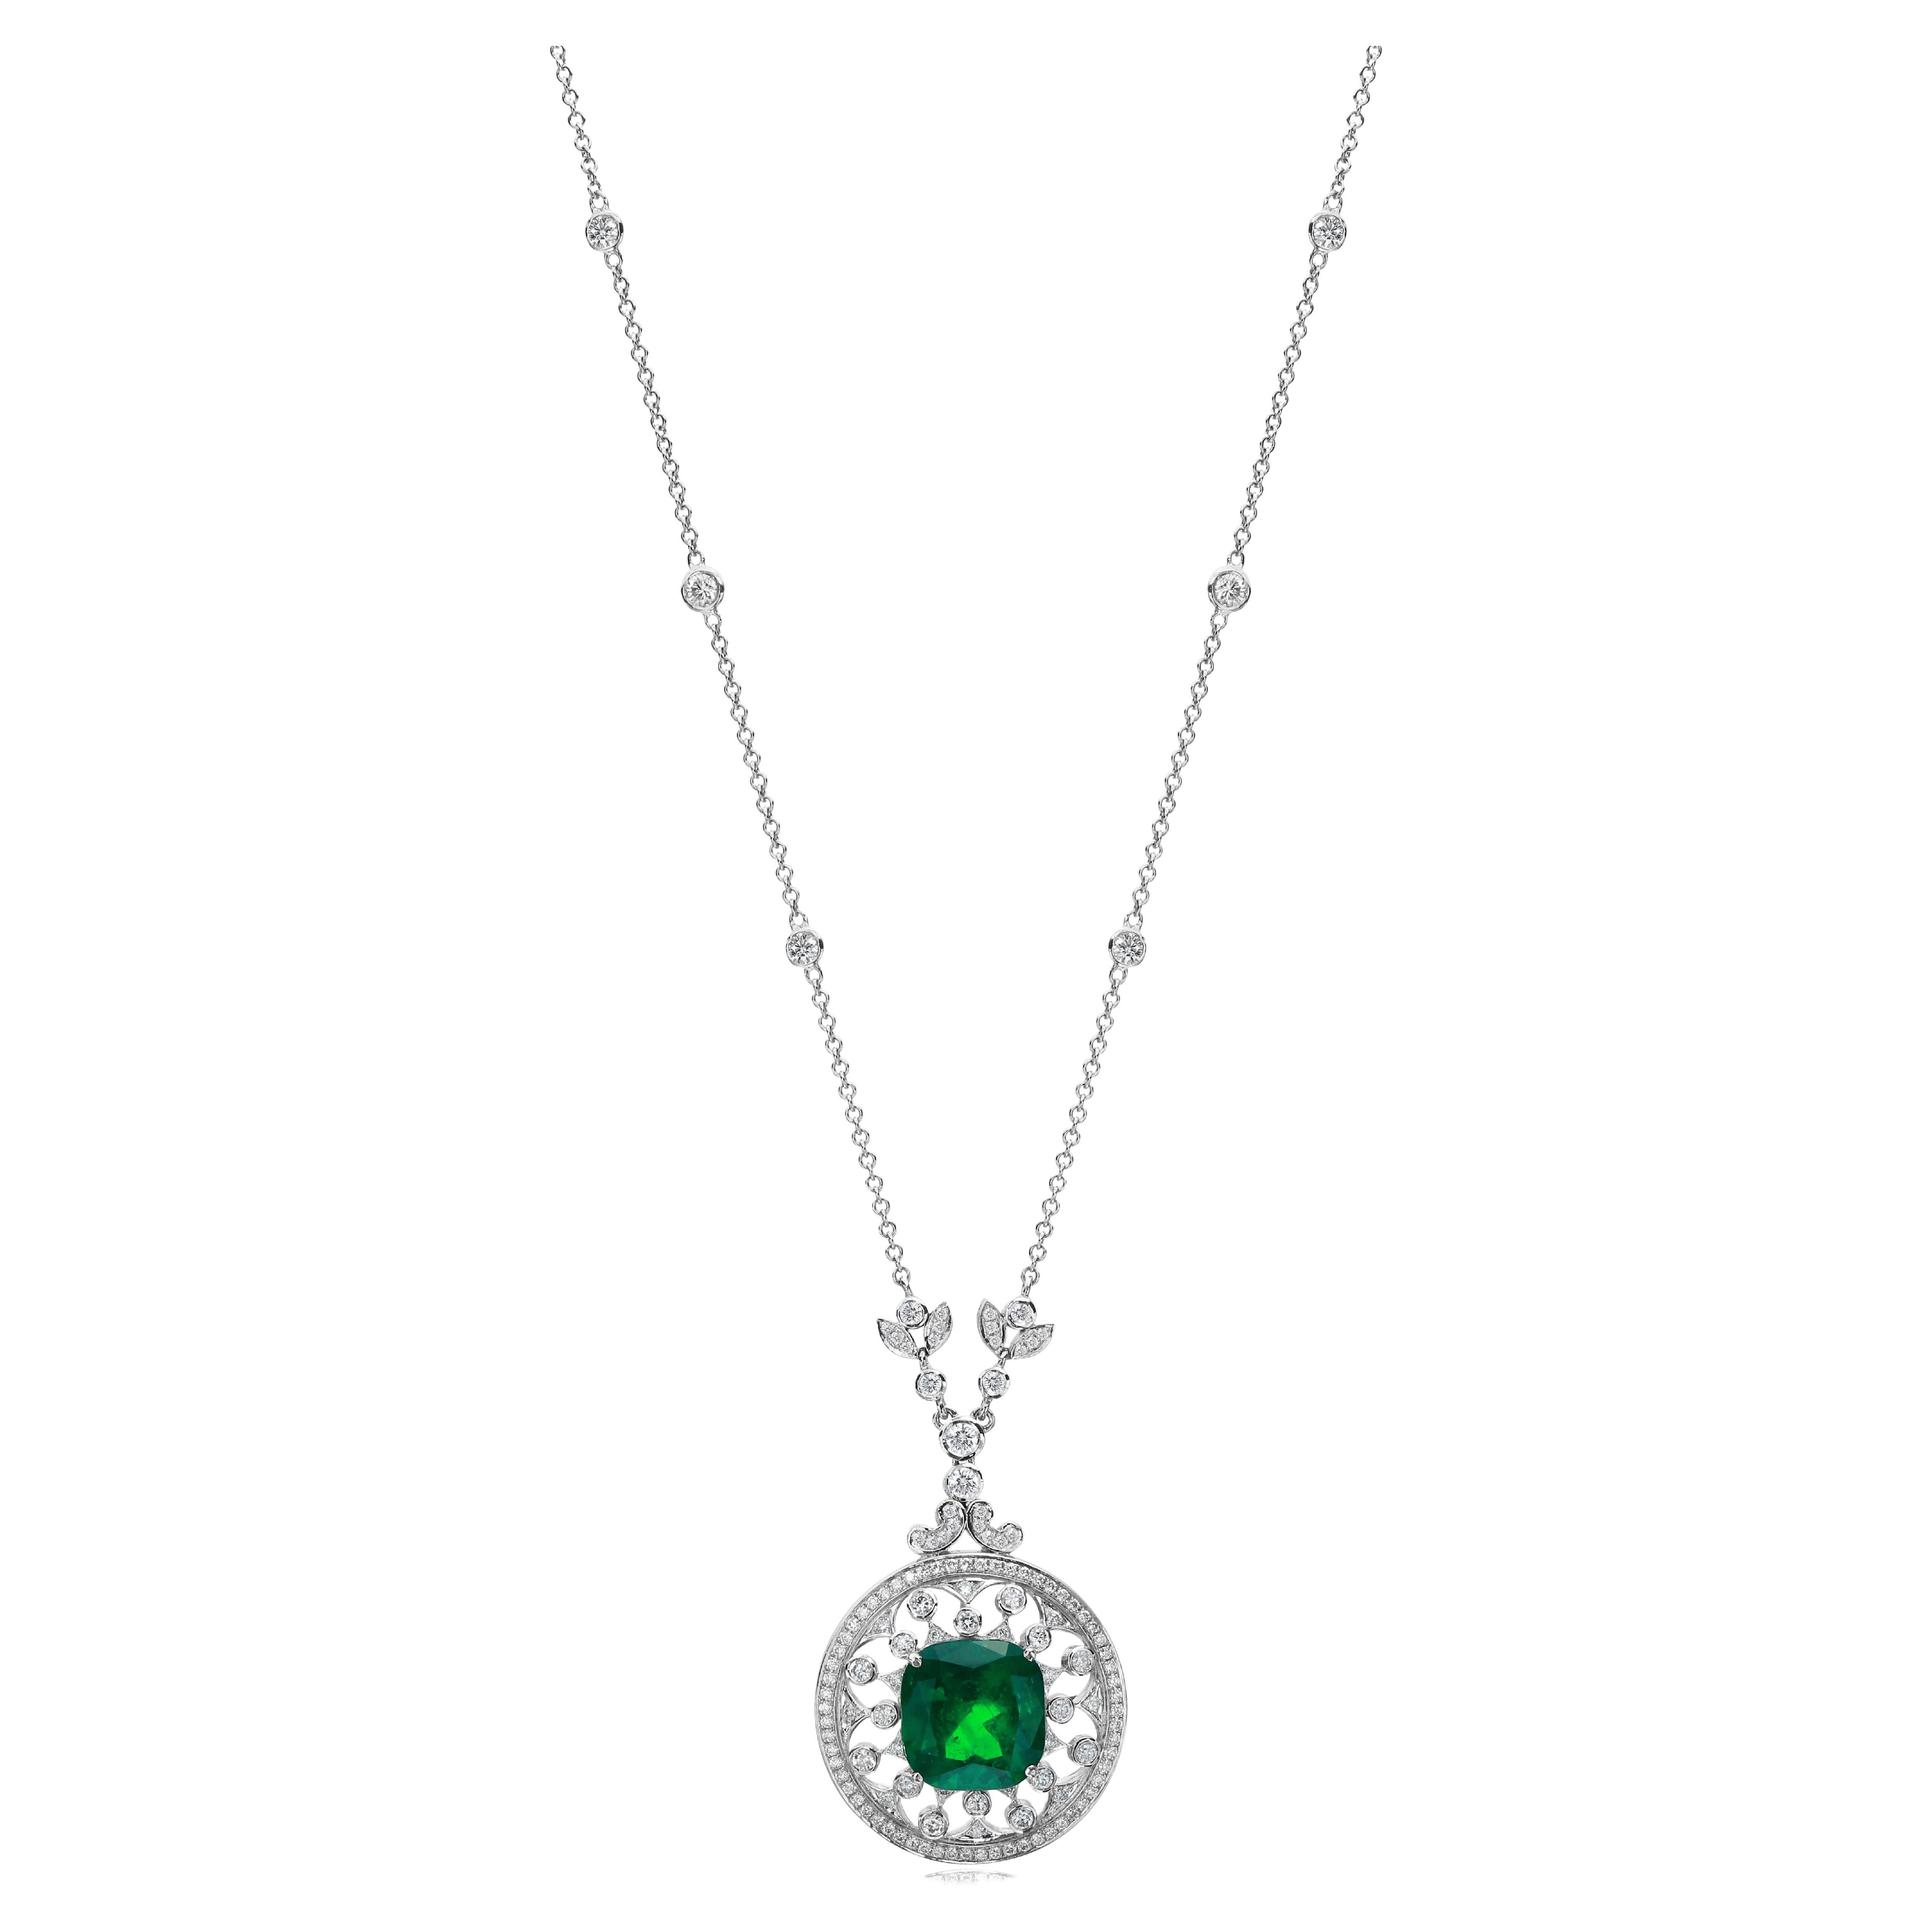 GIA Certified 6.88 Carat Emerald and Diamond Necklace For Sale